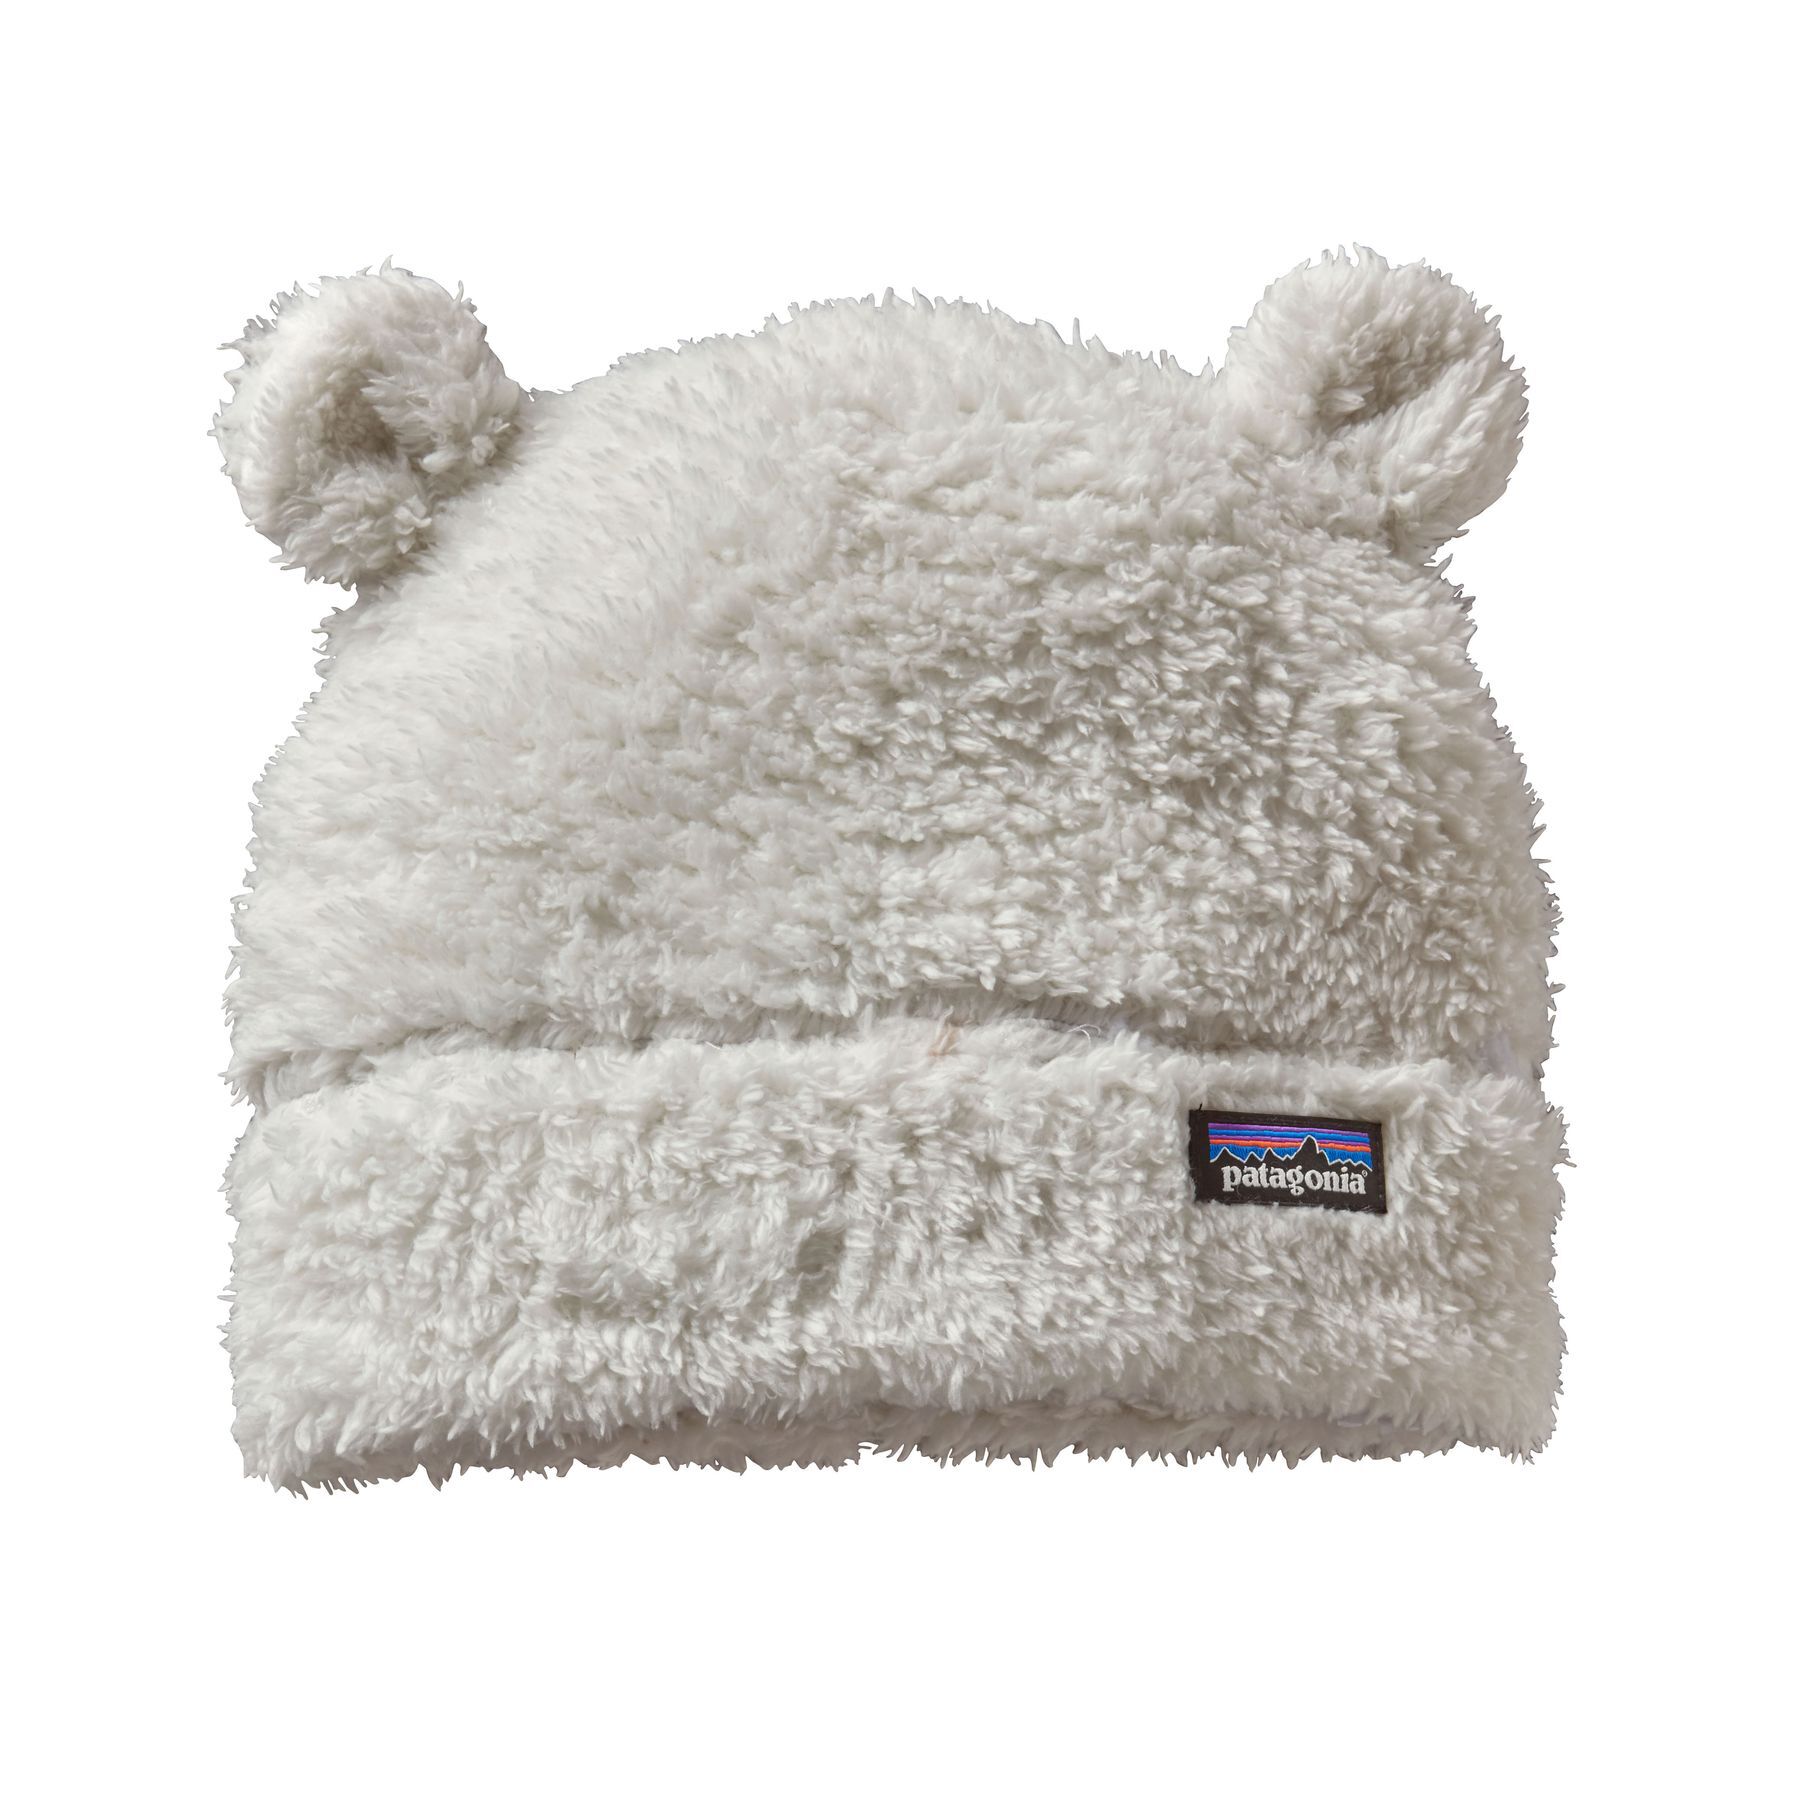 Patagonia Baby Furry Friends Hat - Pipo